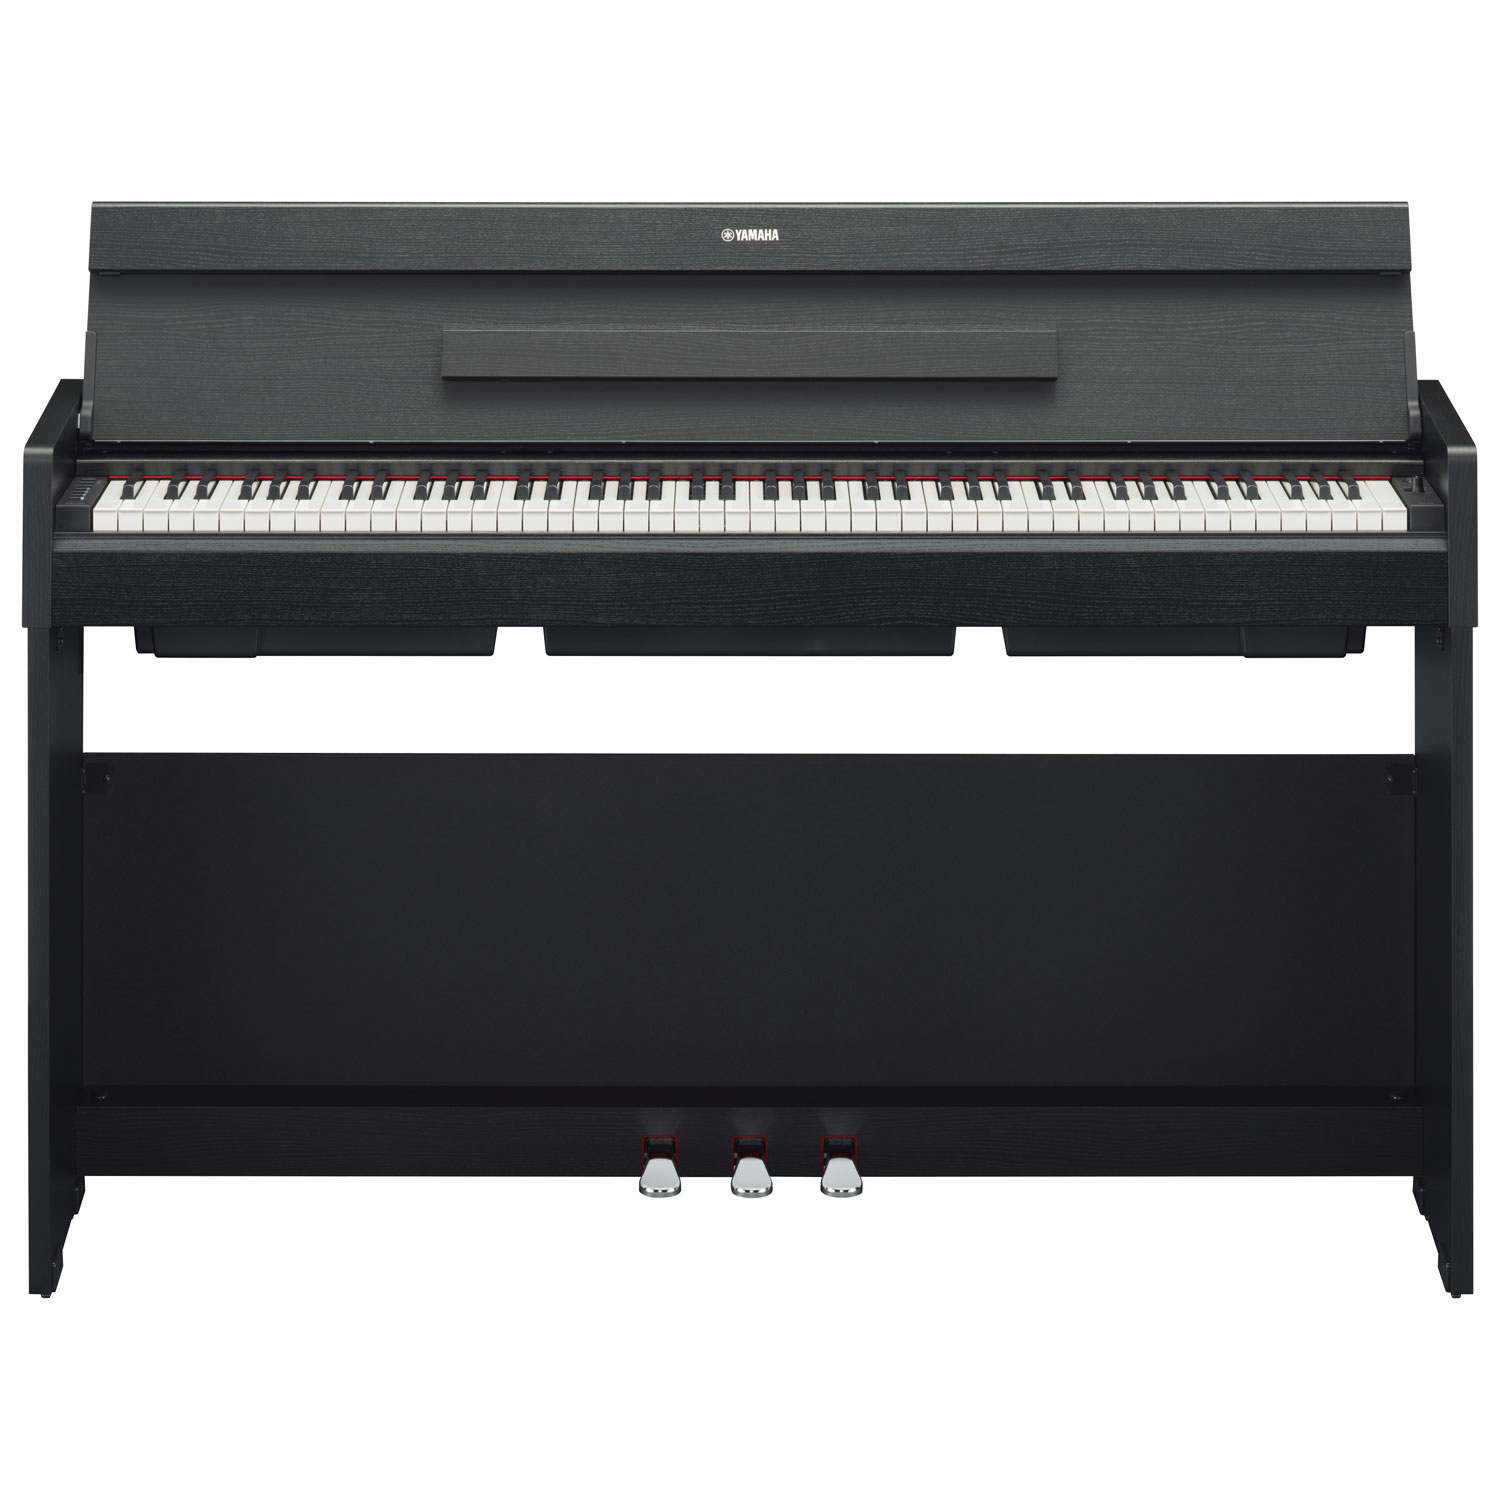 Yamaha YDPS35 ARIUS Slim 88-Key Weighted Action Digital Piano with Stand & 3 Pedals (YDPS35) - Black